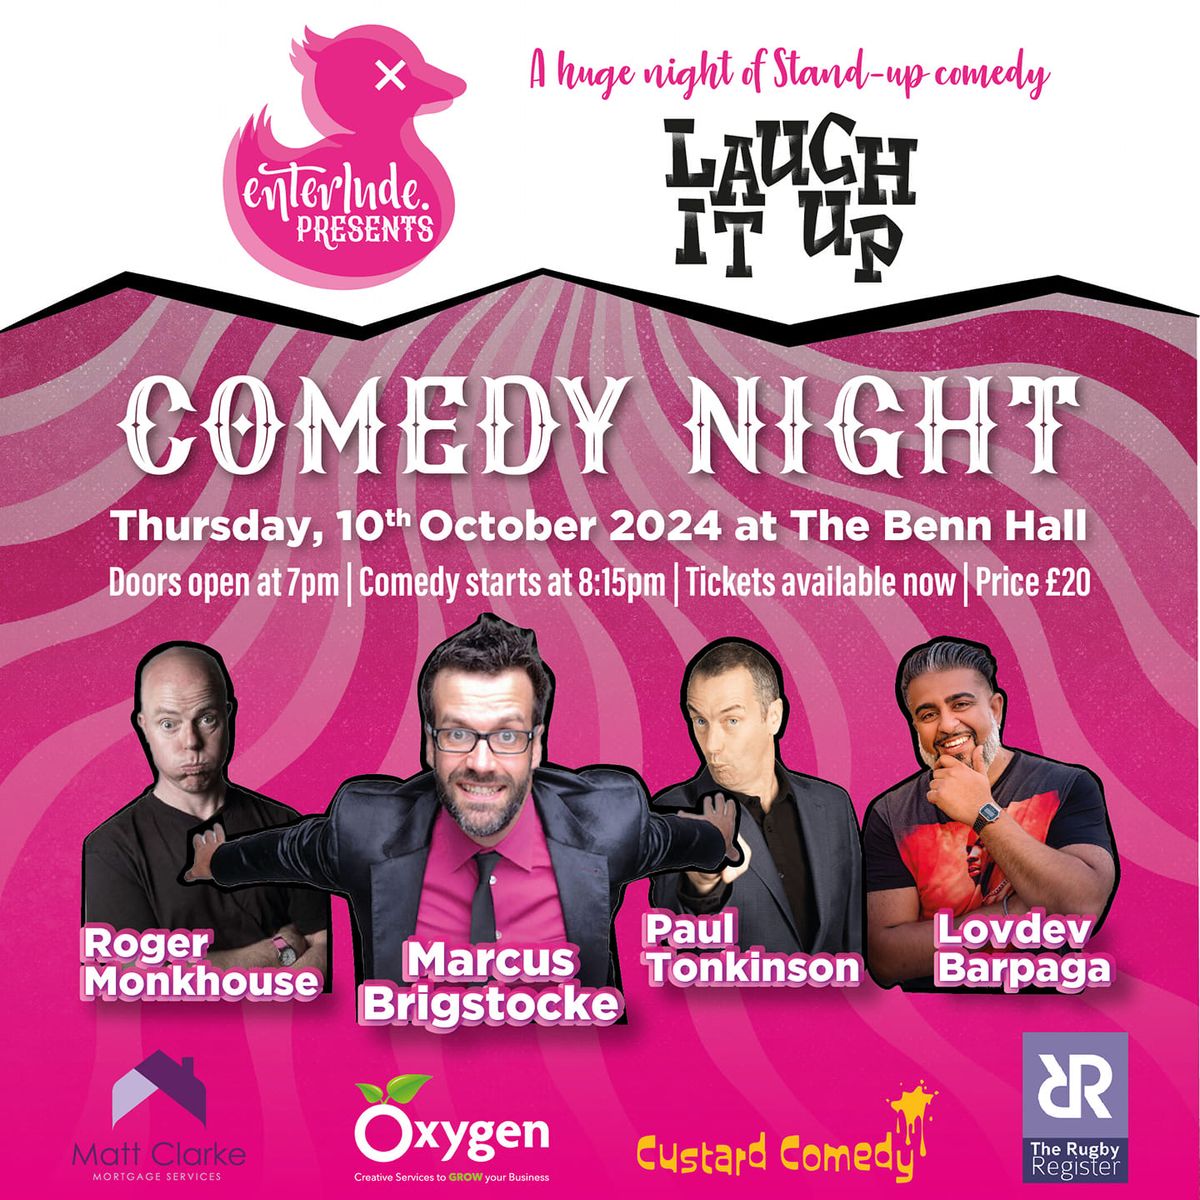 LAUGH IT UP - HEADLINED BY MARCUS BRIGSTOCKE & GUESTS